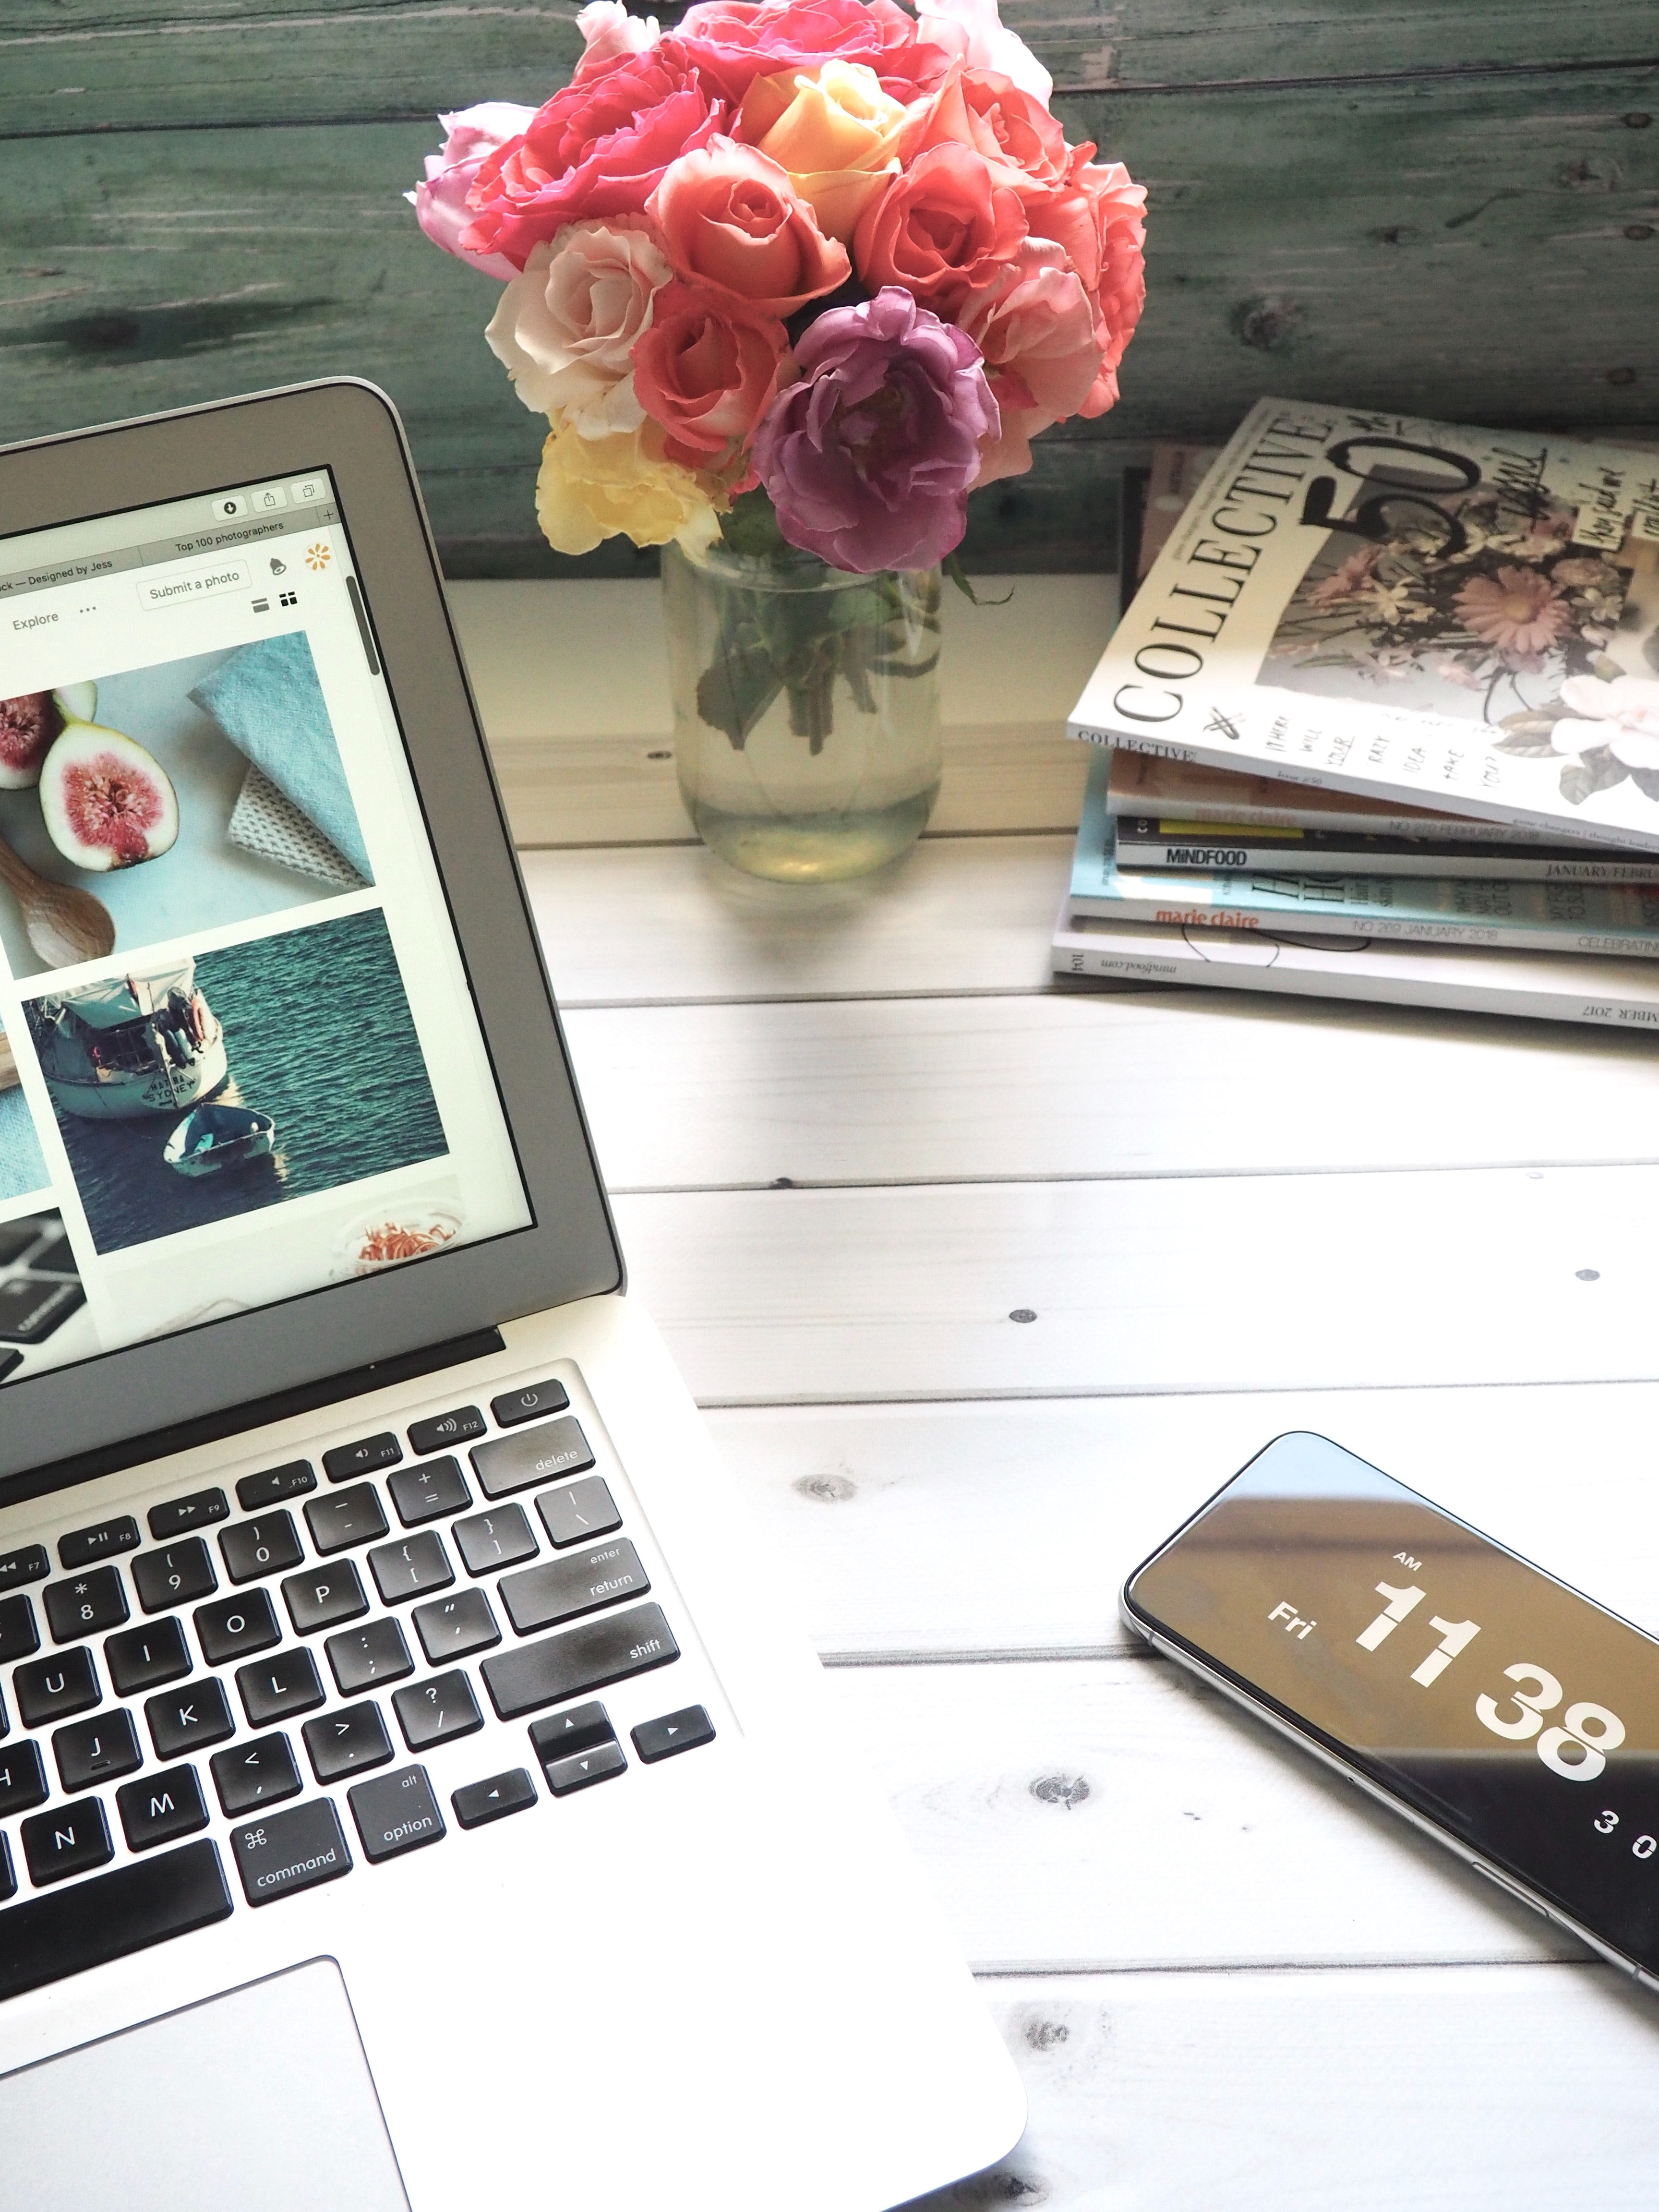 Macbook Air, Flower Bouquet and Magazines on White Table, Blog, Mobile phone, Workplace, Working, HQ Photo